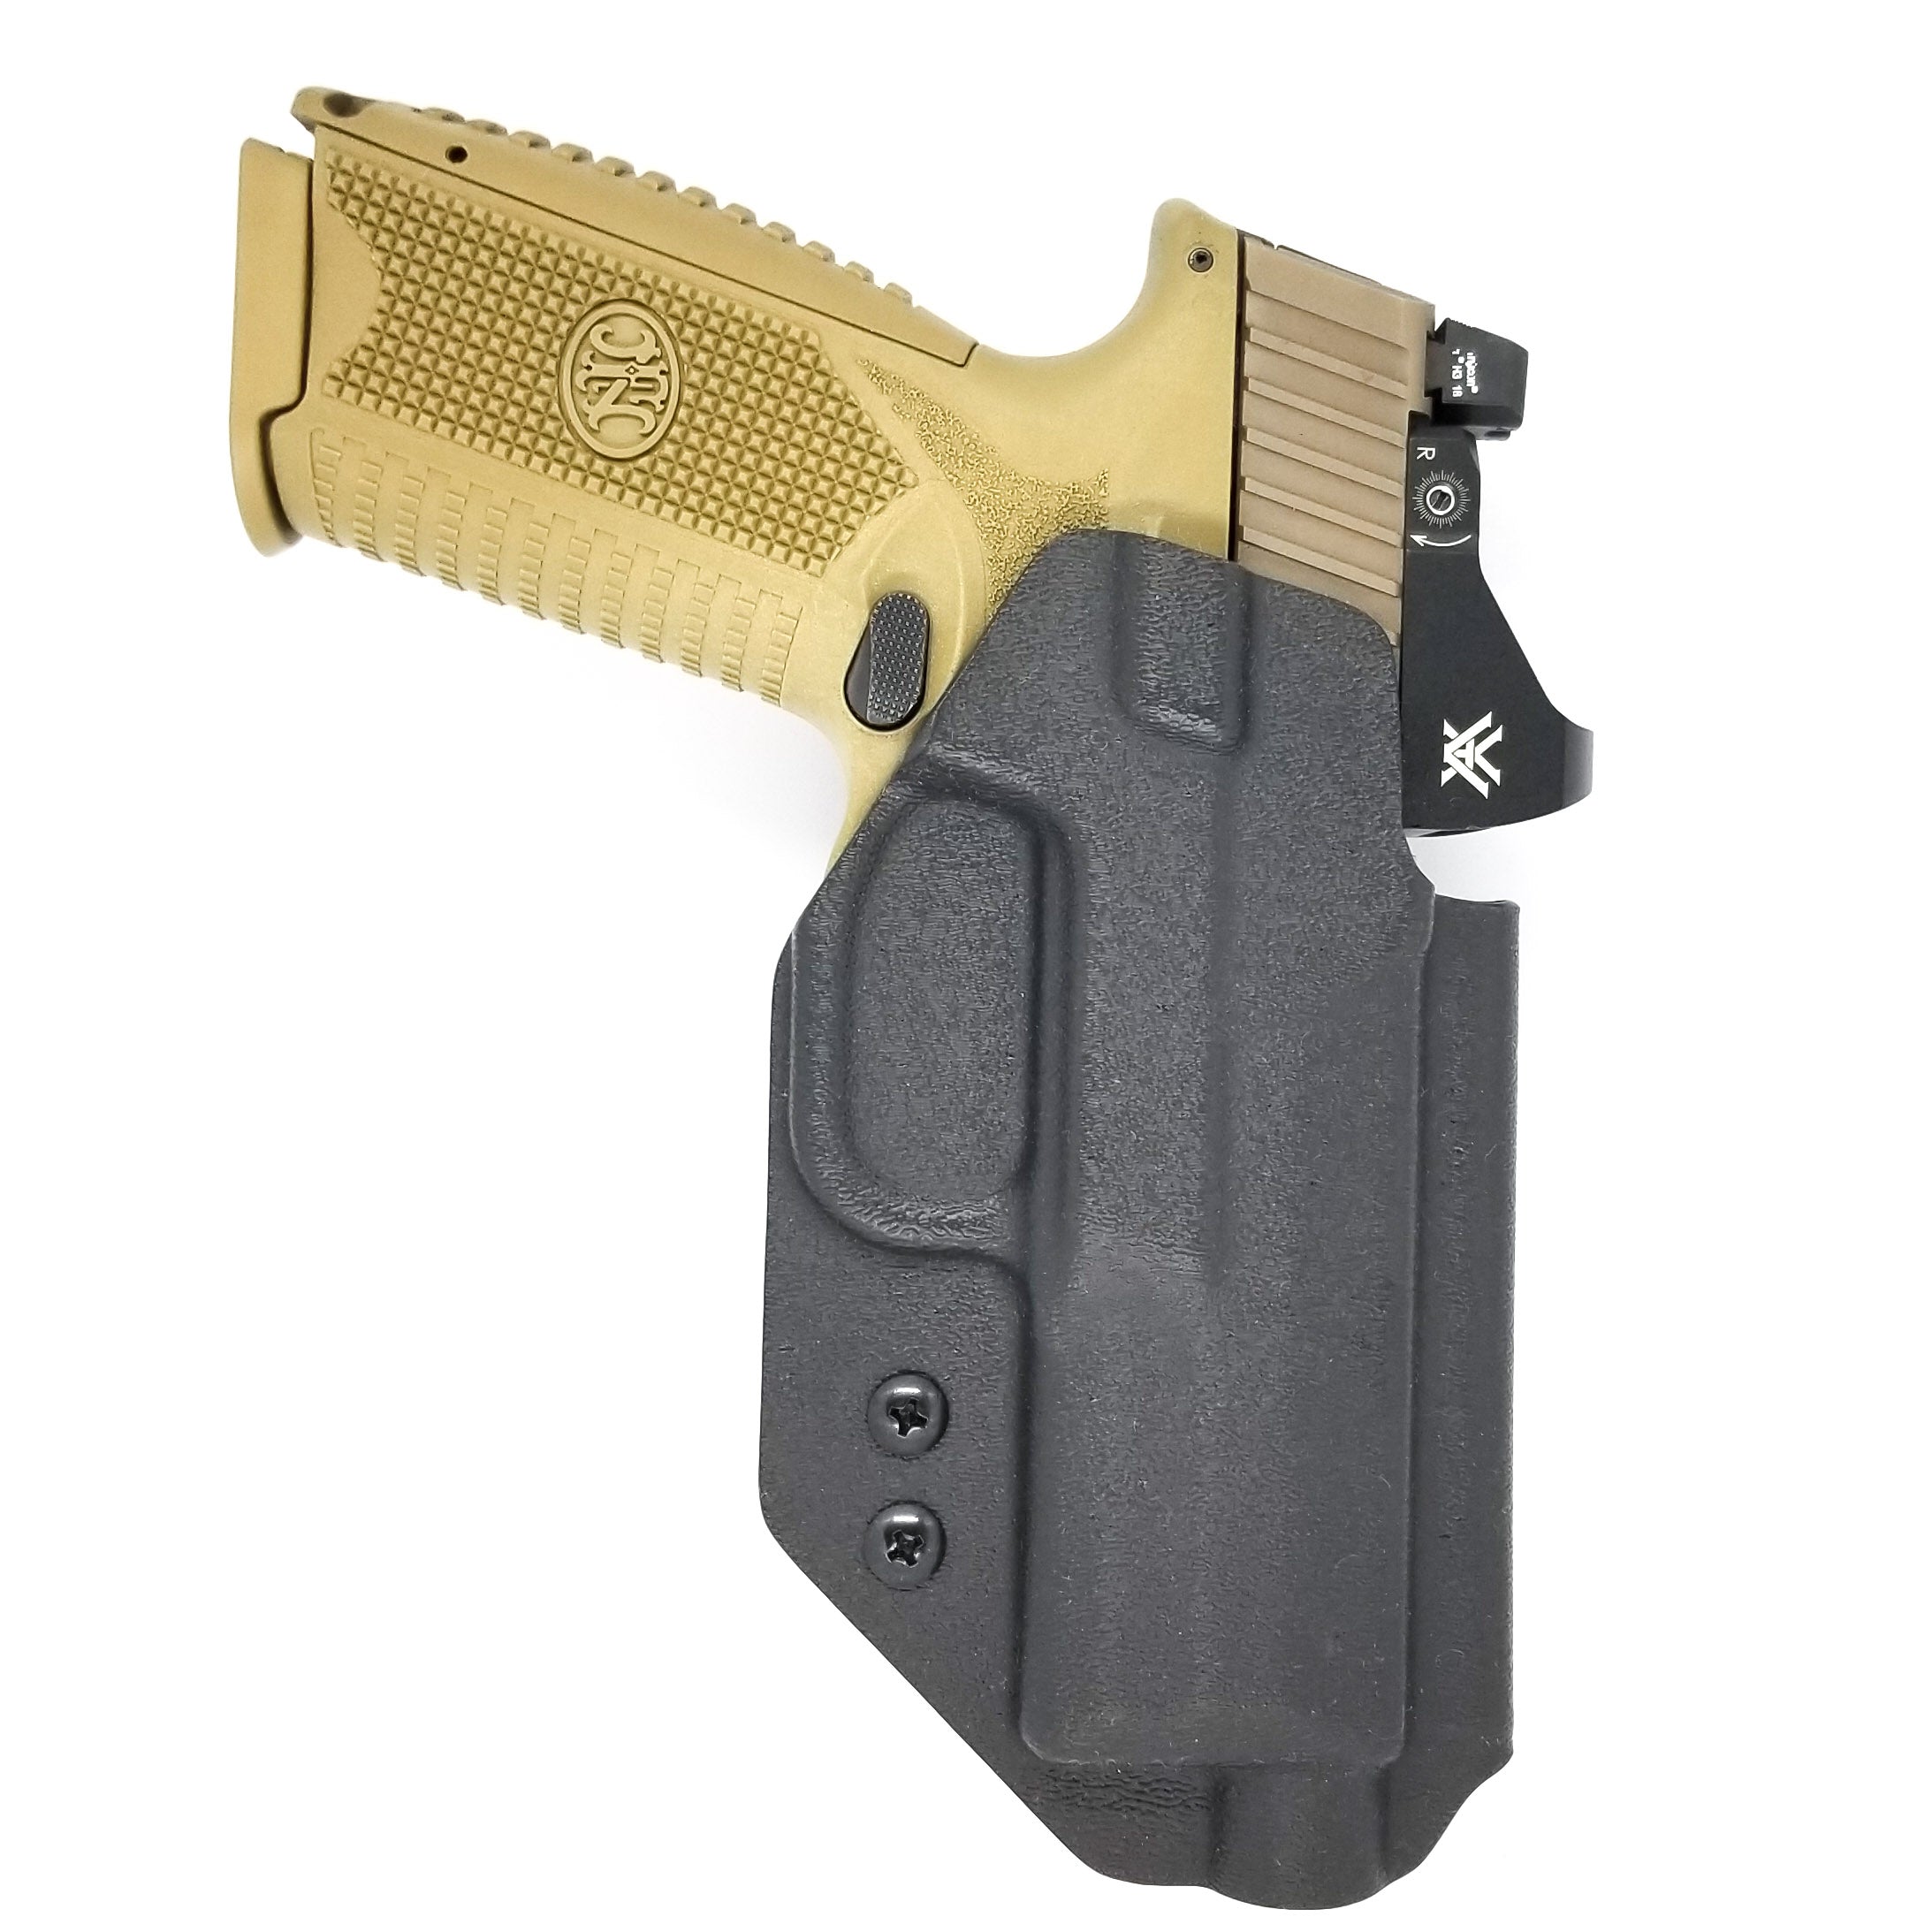 Best Outside Waistband Taco Style Holster for the FN 509 standard and 509 Tactical versions. Adjustable retention High sweat guard standard, medium and low height available on request. Custom material colors, patterns and belt attachments available upon request